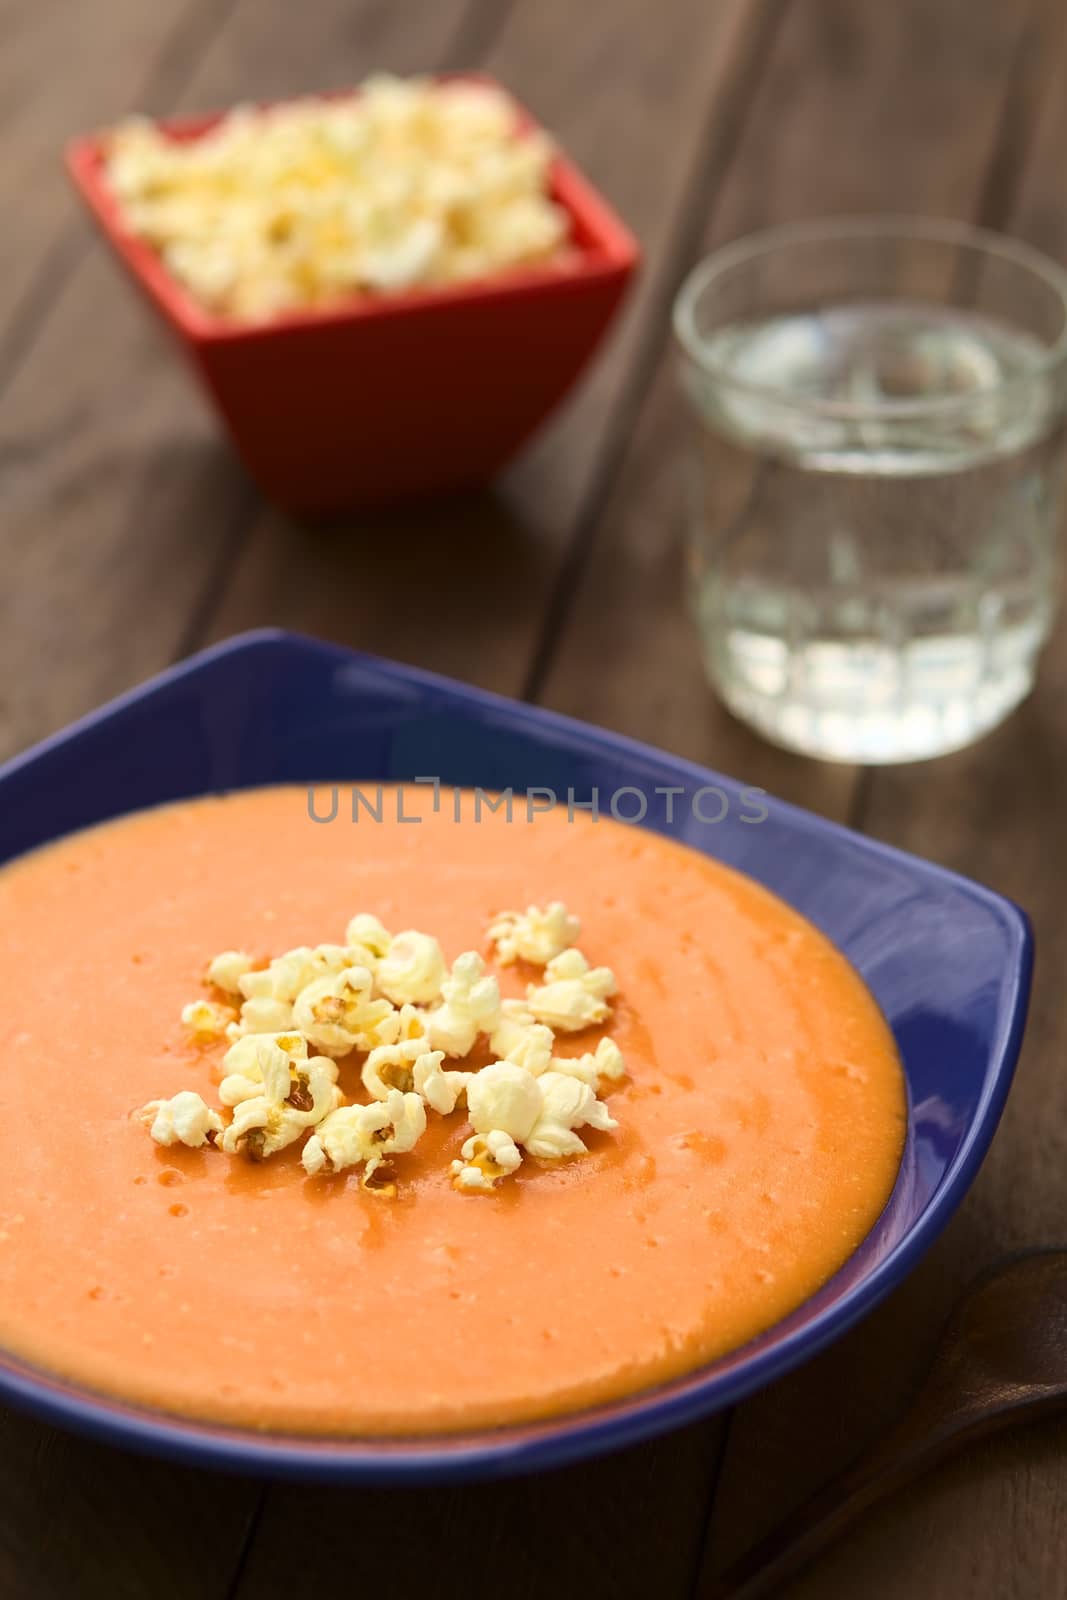 Ecuadorian tomato and potato cream soup served with popcorn on top (Selective Focus, Focus on the front of the popcorn on the soup)